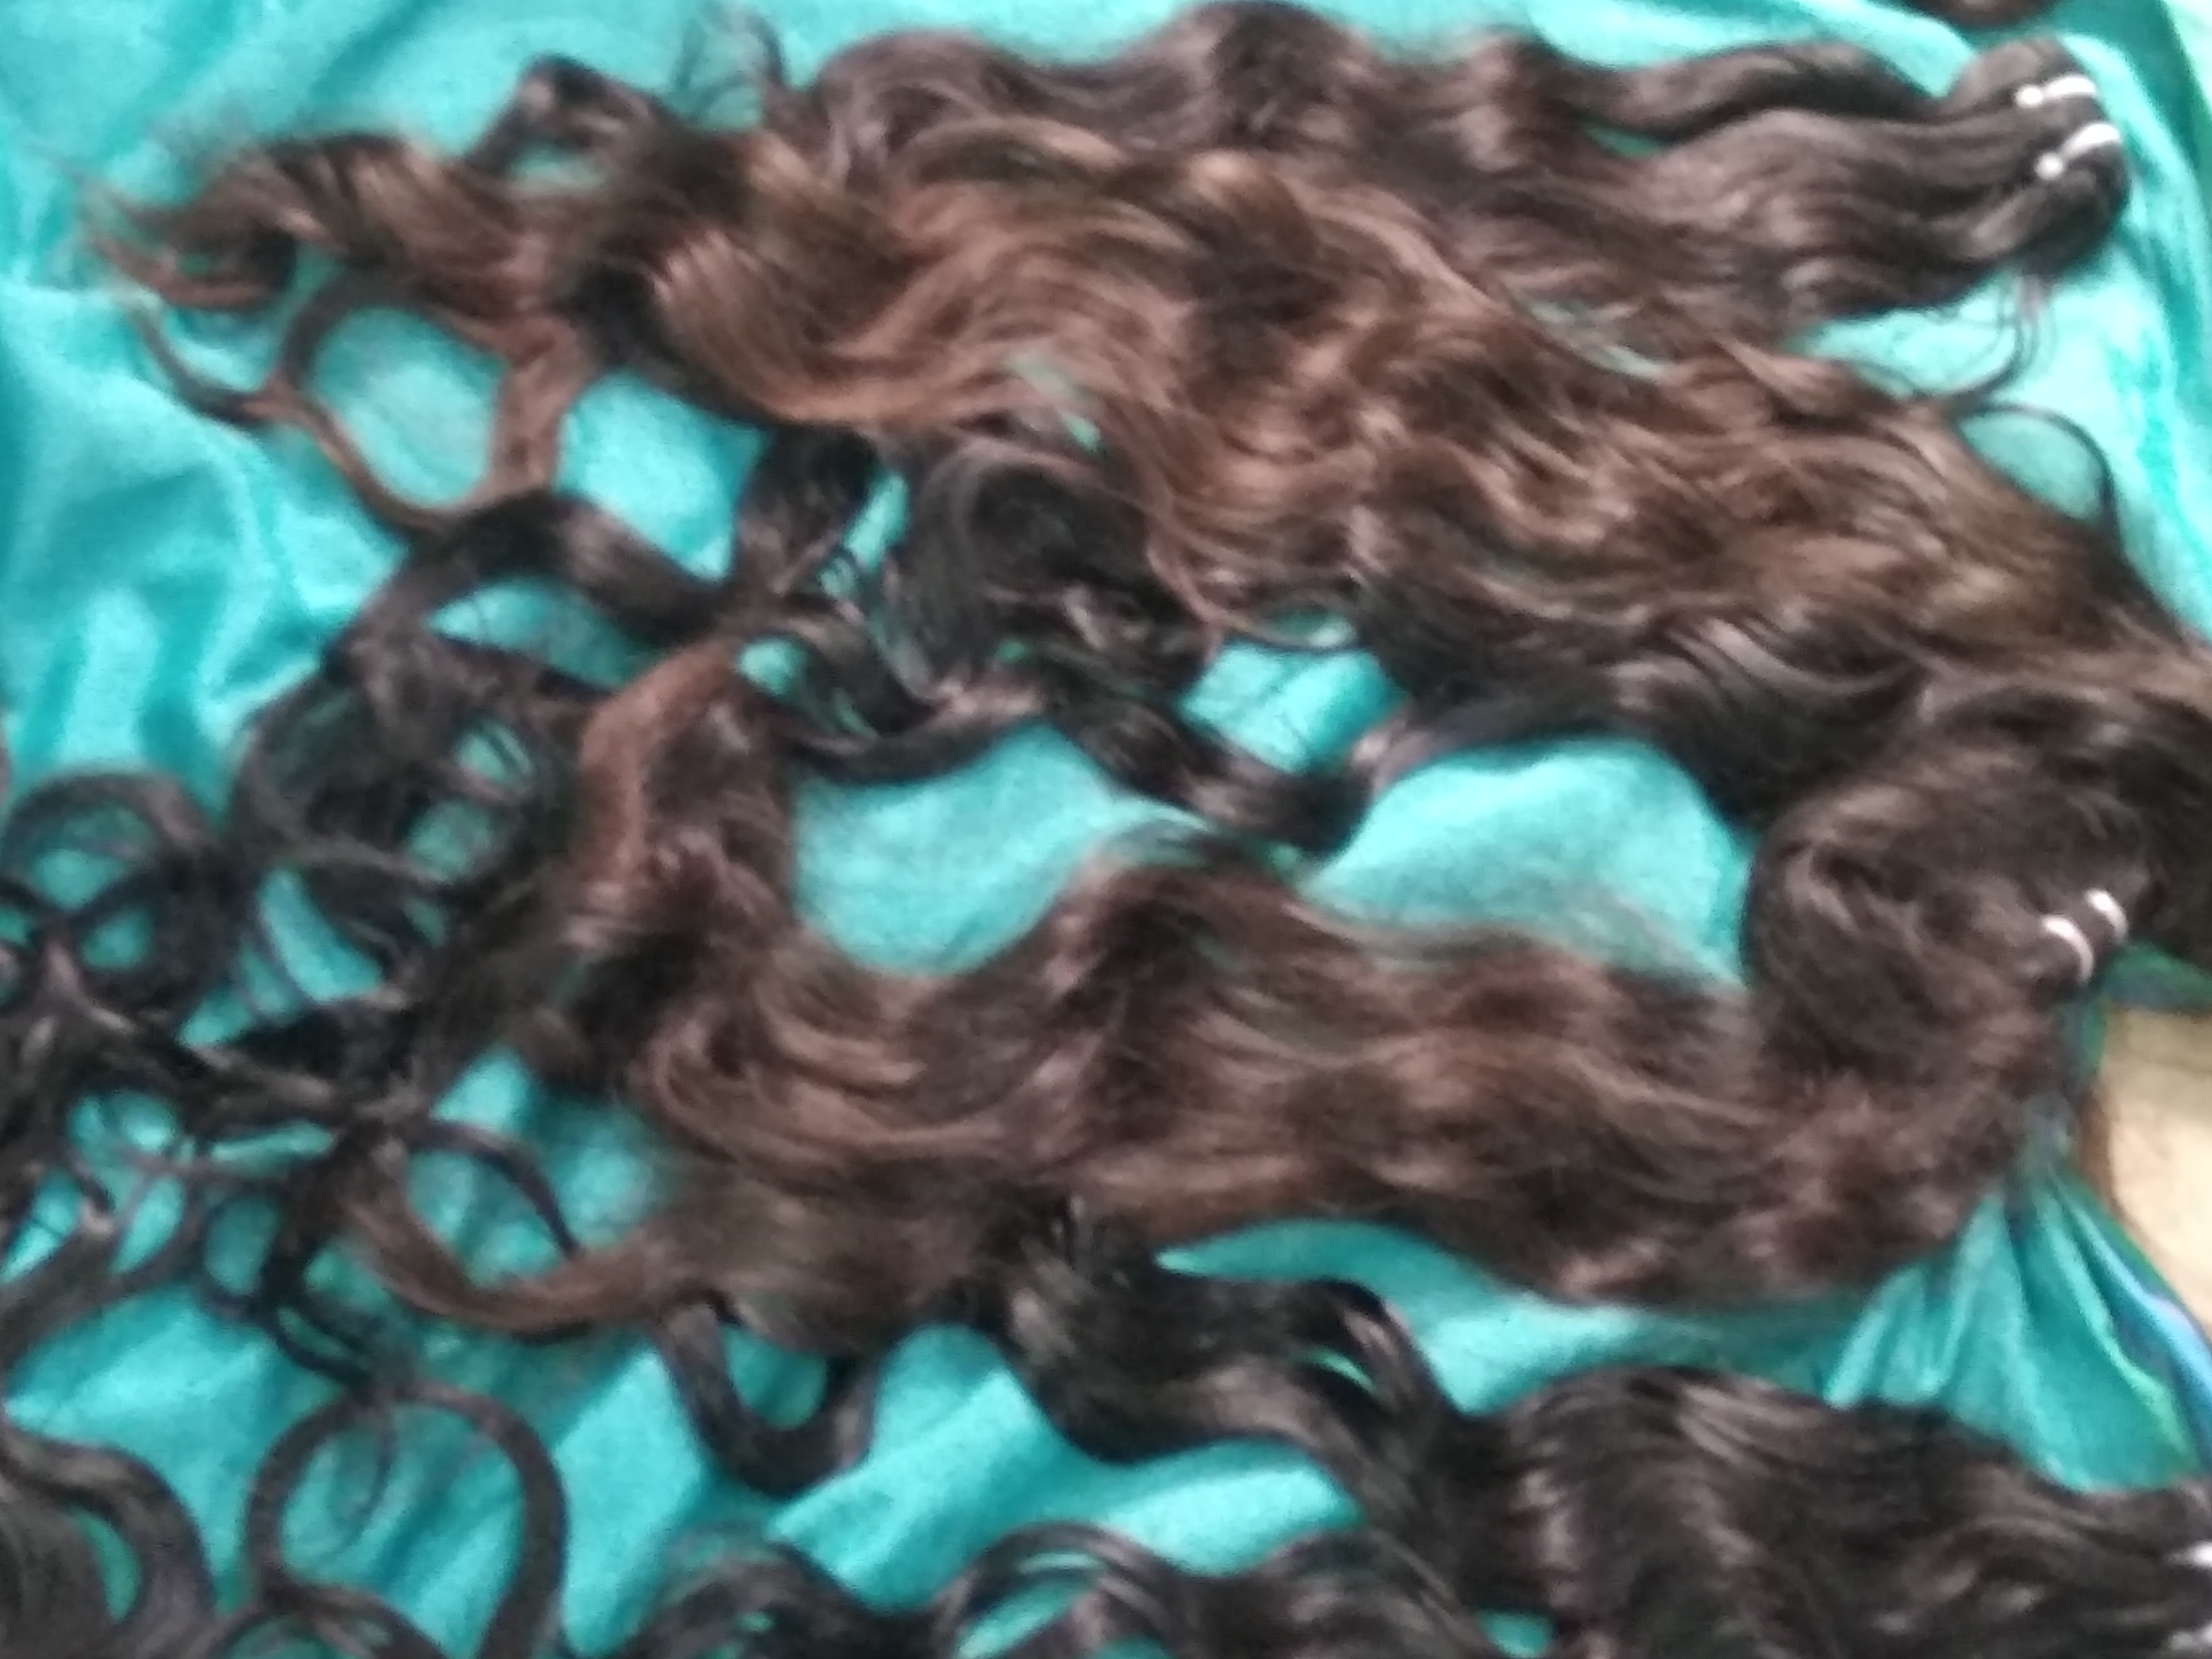 Without Chemical Processed Pure Body Wavy Indian Human Hair